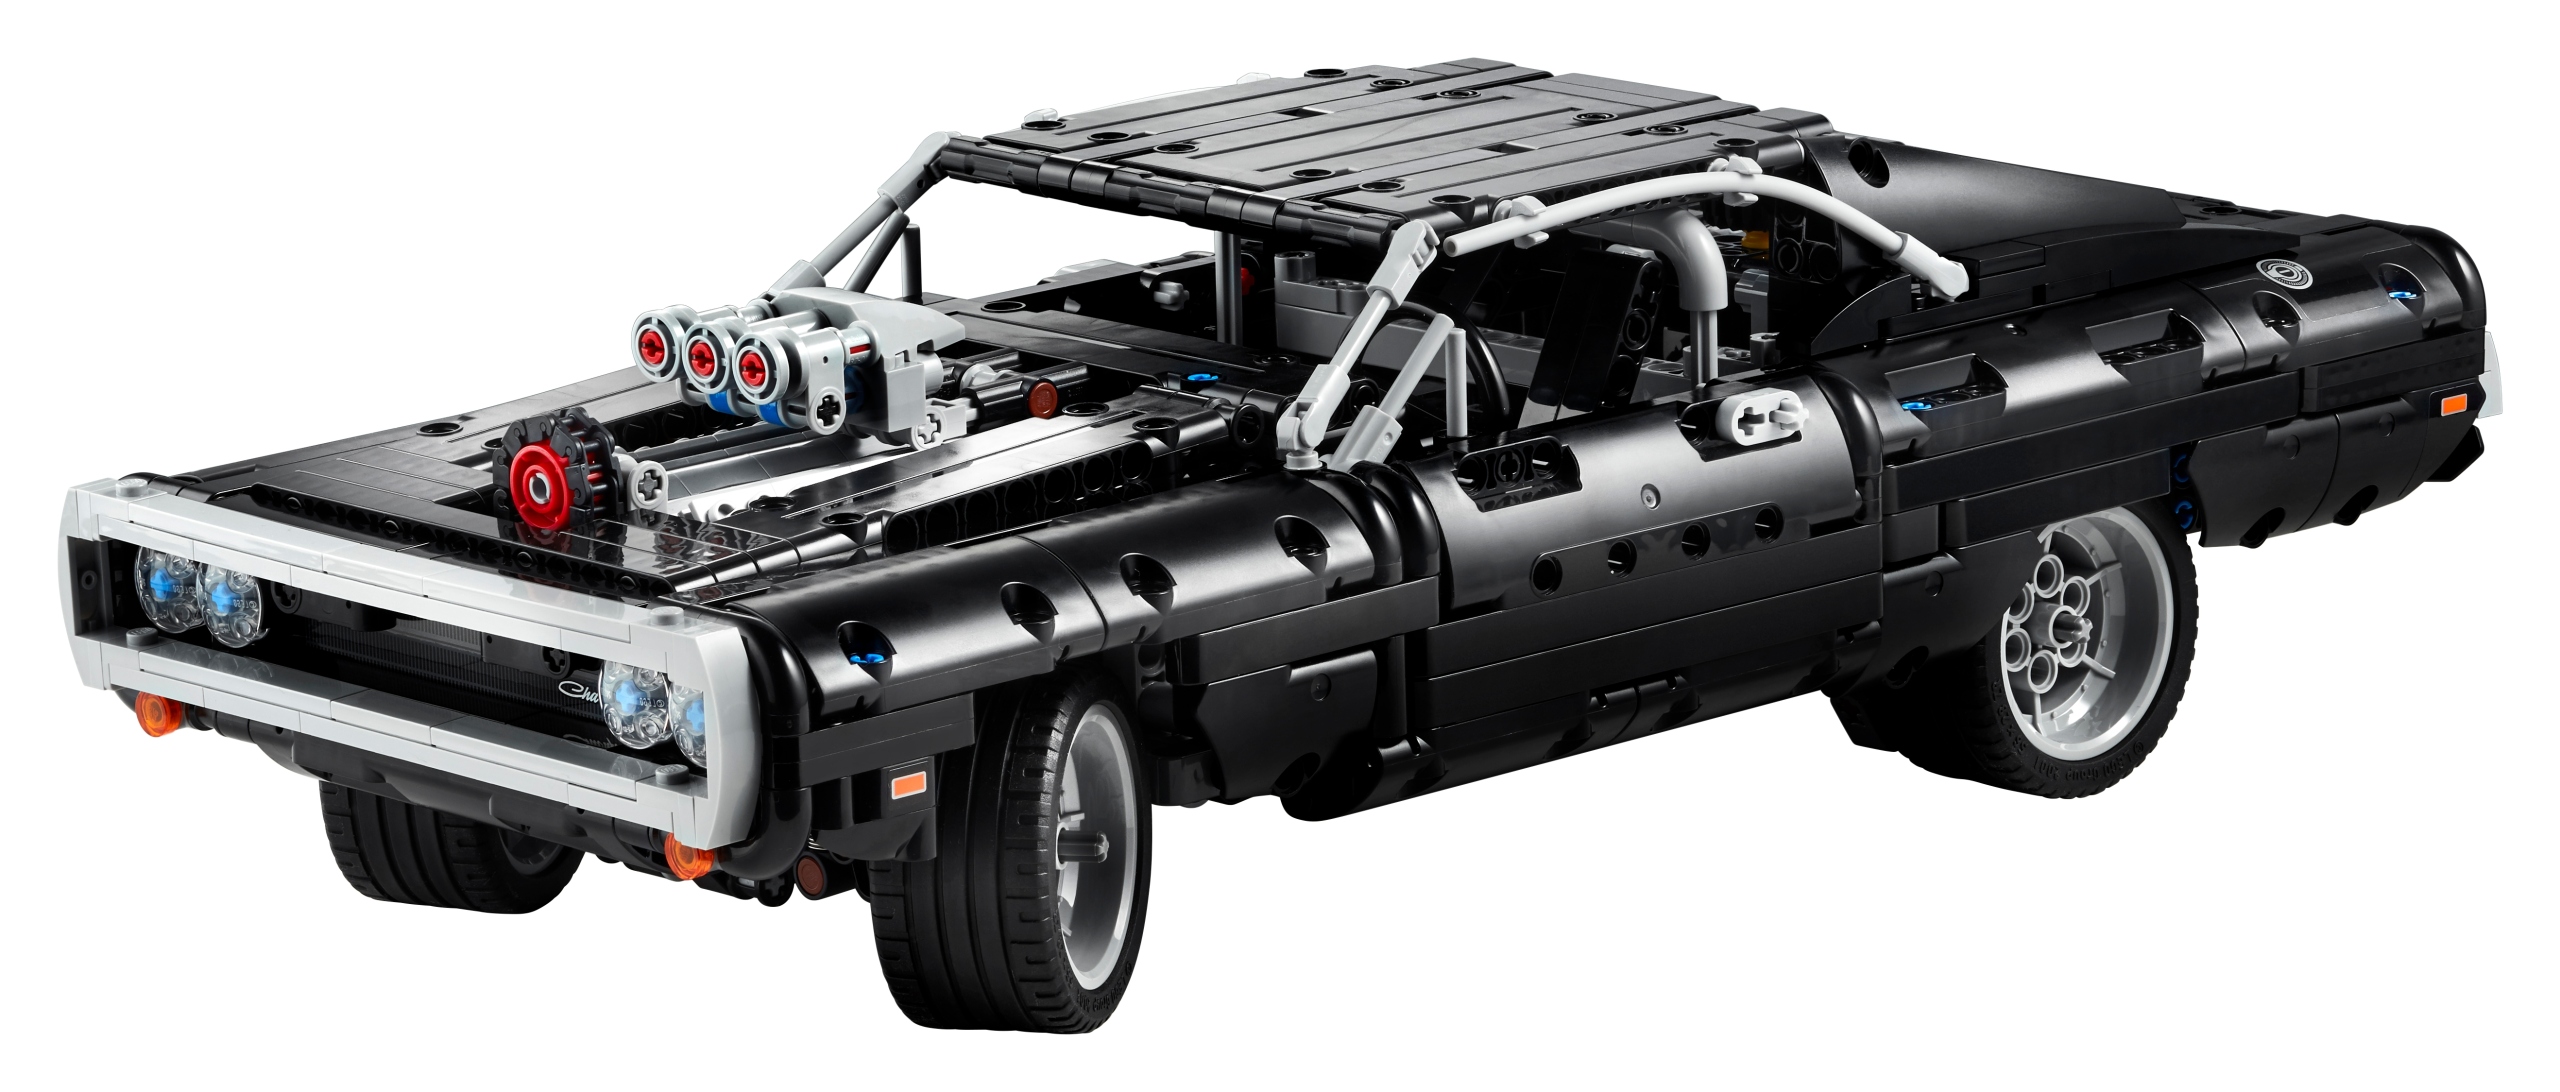 LEGO Technic Dom's Dodge Charger 42111 EAN 5702016617498